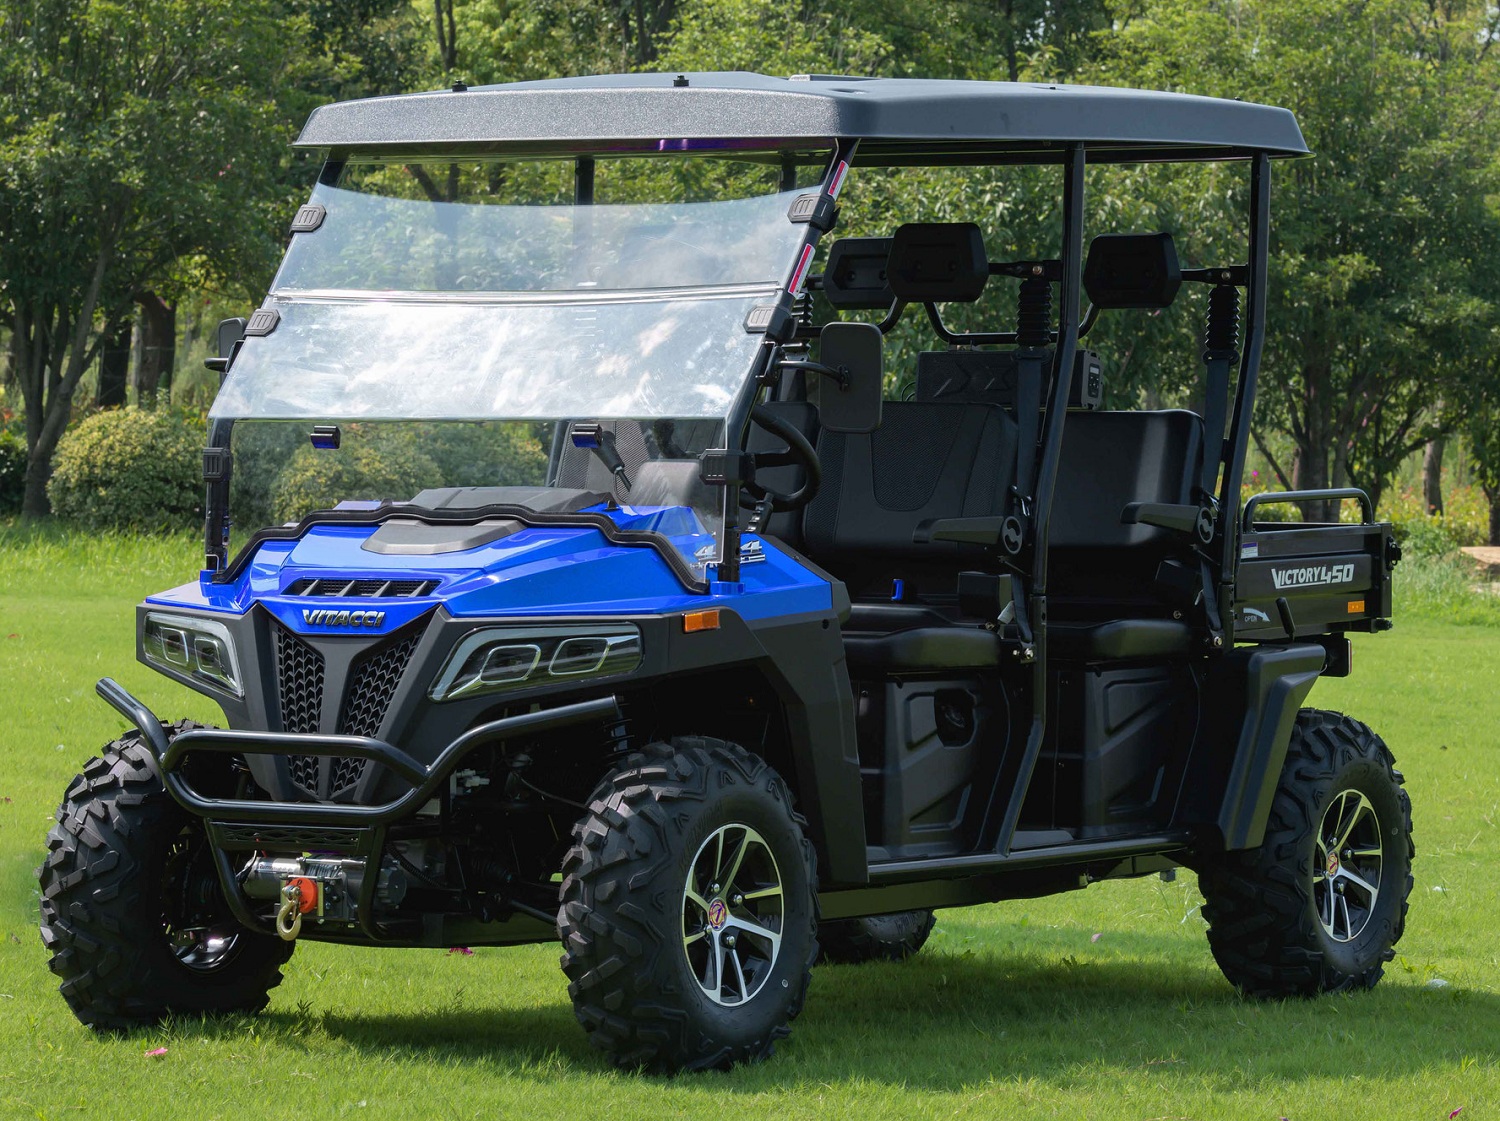 New Vitacci Victory 450 Pro Dlx Golf Cart Utv, 4-Seater, Single cylinder, water cool With Dumb Bed - Blue